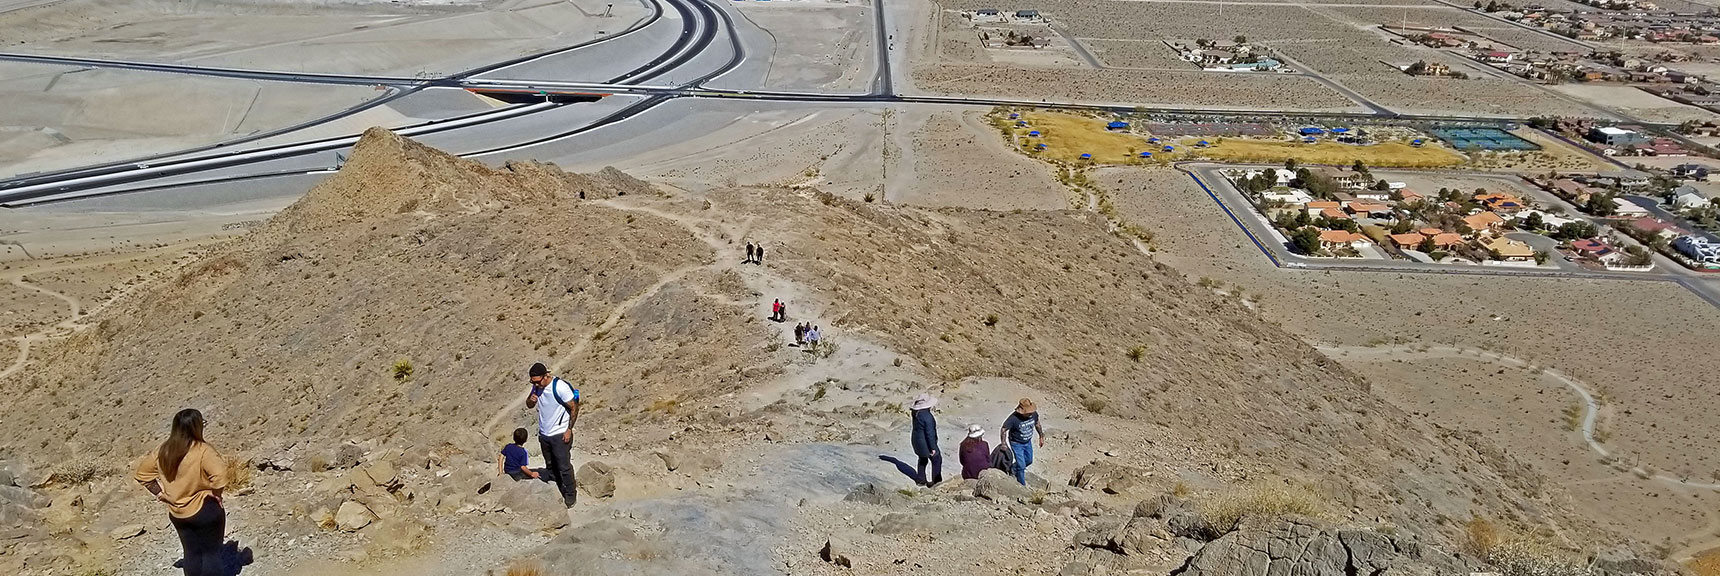 Descending the Main Summit Trail, Then Circle Back to Lone Mountain Discovery Park. | Lone Mountain | Las Vegas, Nevada